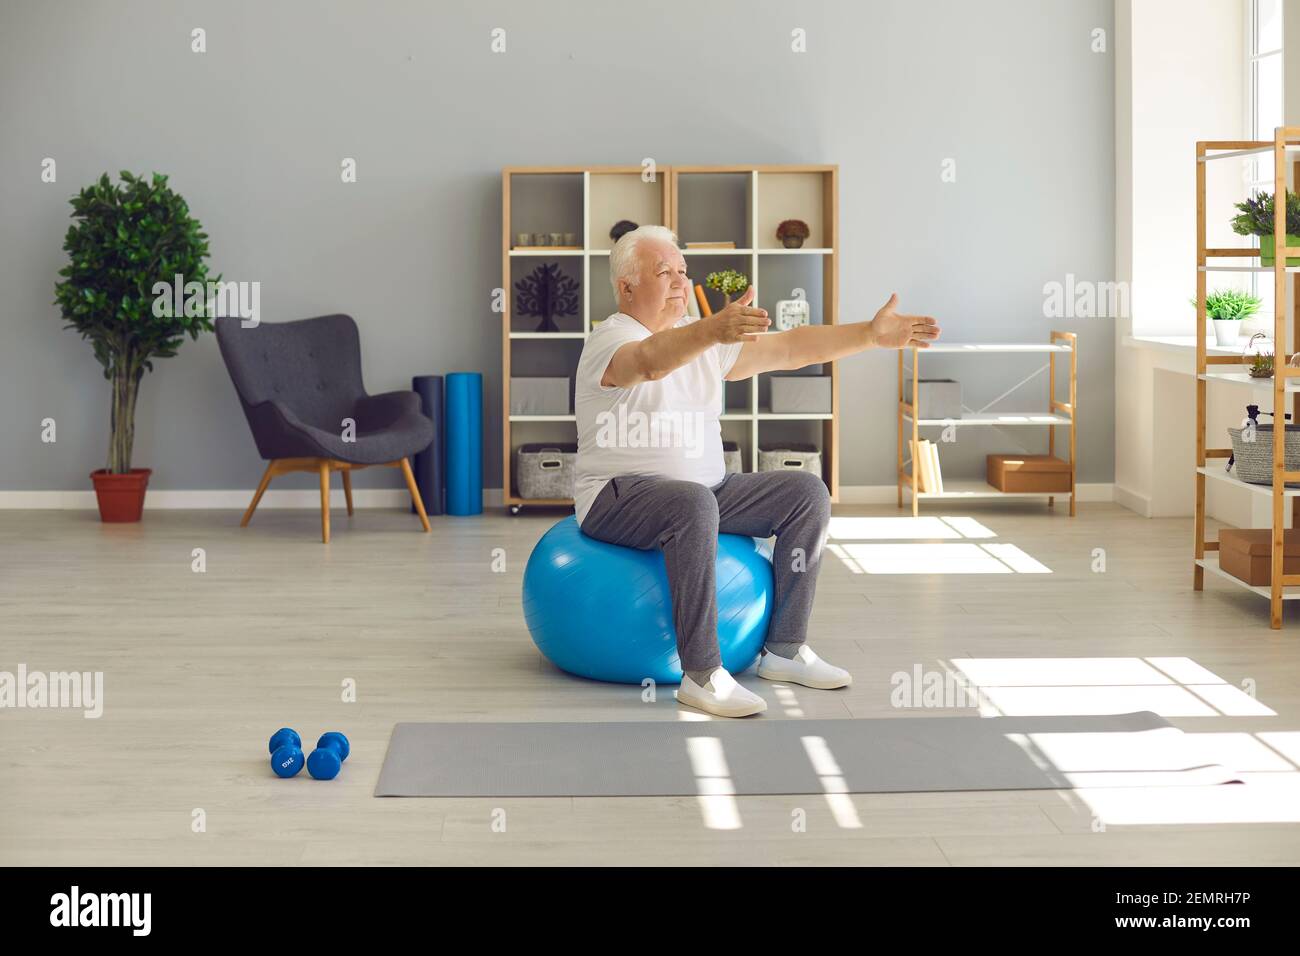 Elderly man sitting and exercising on fitness ball with arms stretched at home or in rehabilitation clinic Stock Photo